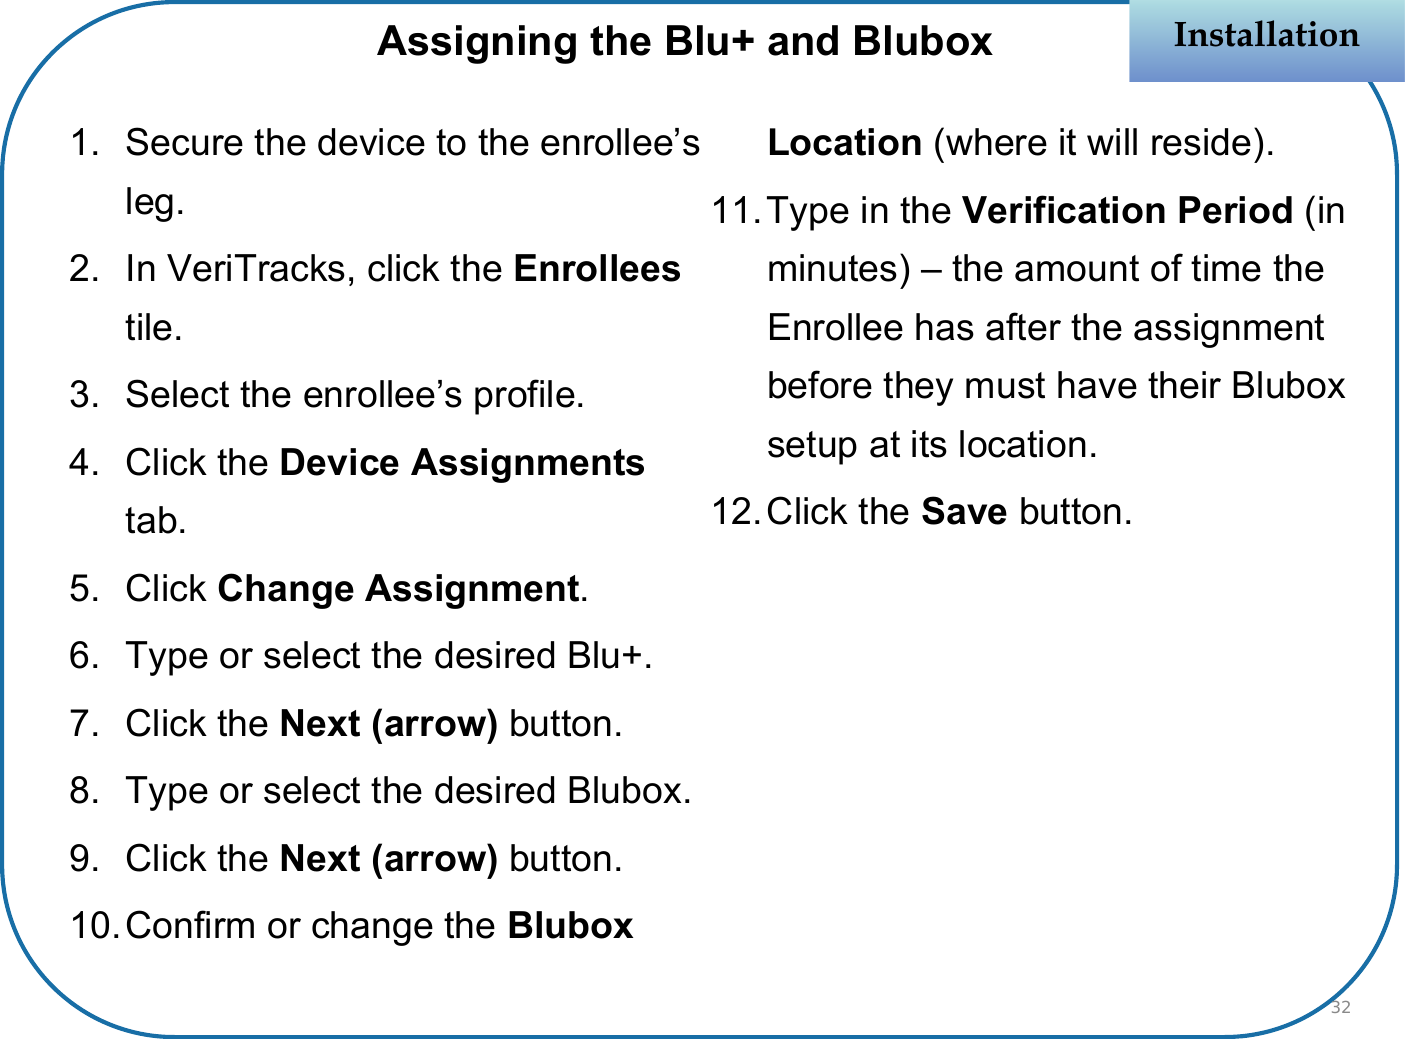 1. Secure the device to the enrollee’s leg.2. In VeriTracks, click the Enrolleestile.3. Select the enrollee’s profile.4. Click the Device Assignments tab.5. Click Change Assignment.6. Type or select the desired Blu+.7. Click the Next (arrow) button.8. Type or select the desired Blubox.9. Click the Next (arrow) button.10.Confirm or change the Blubox Location (where it will reside).11.Type in the Verification Period (in minutes) – the amount of time the Enrollee has after the assignment before they must have their Blubox setup at its location.12.Click the Save button.InstallationInstallationAssigning the Blu+ and Blubox32